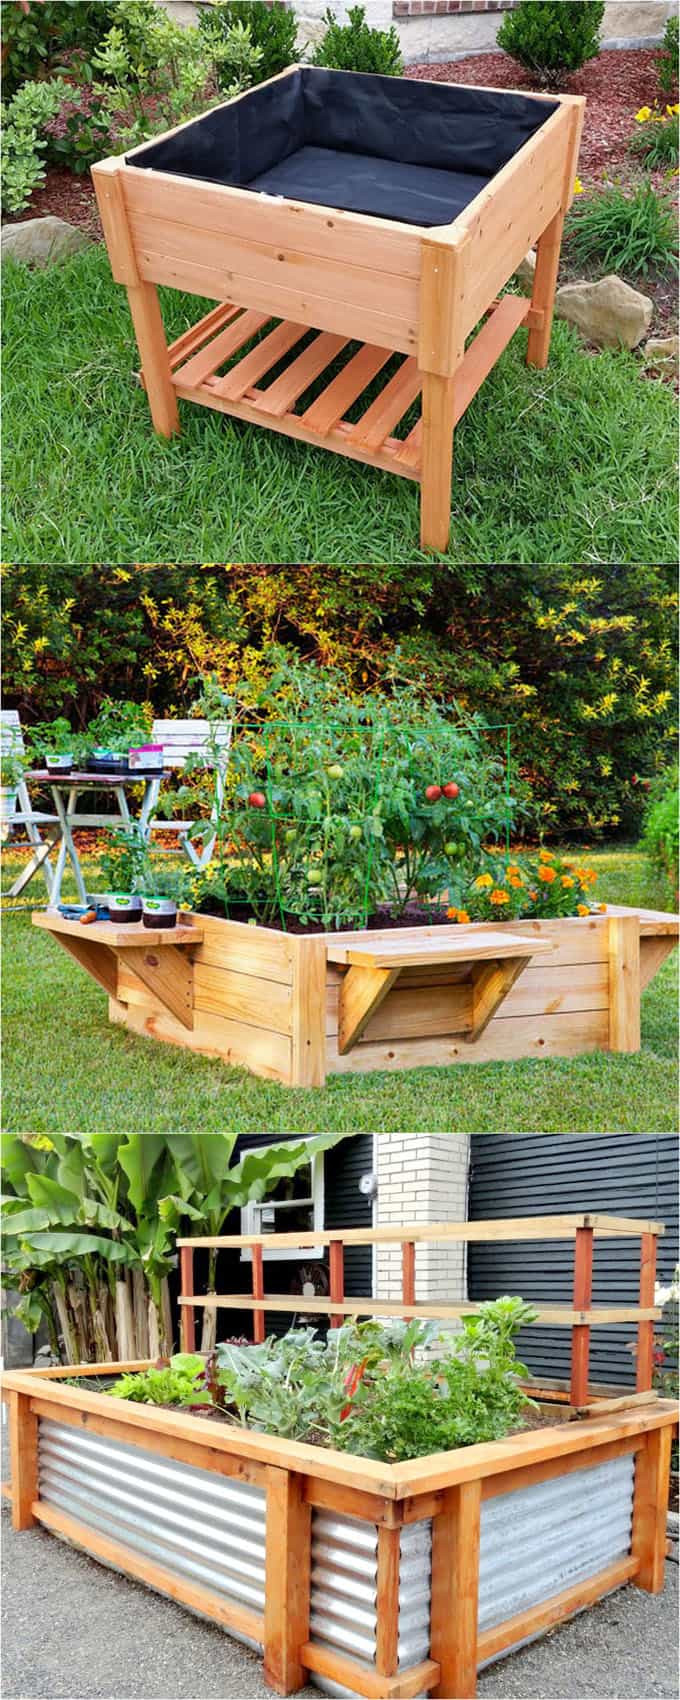 DIY Plans For Raised Beds
 28 Amazing DIY Raised Bed Gardens A Piece Rainbow